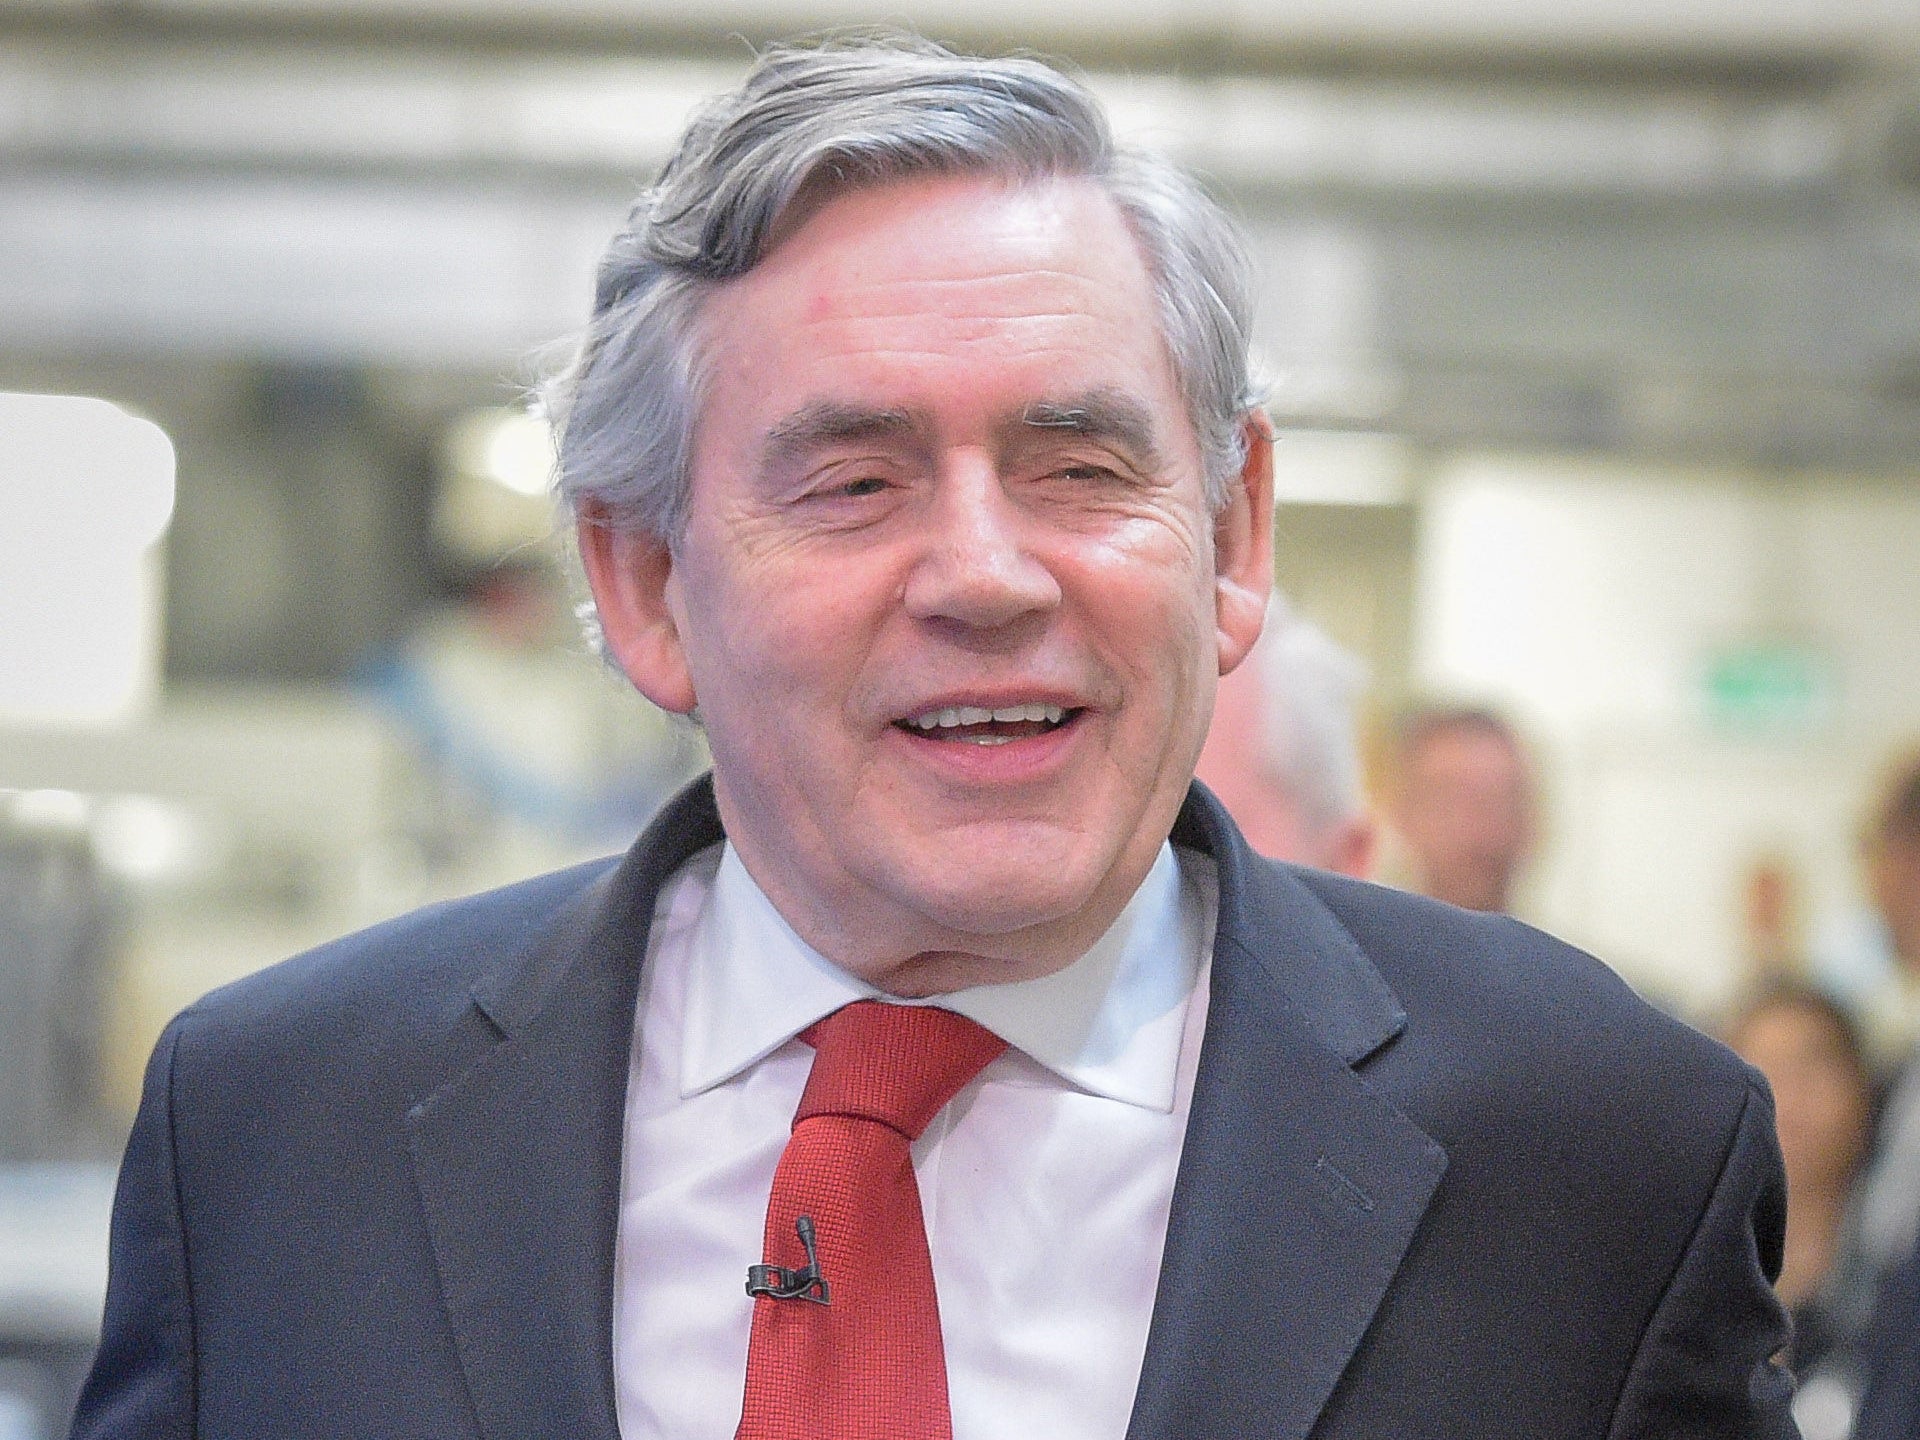 Former PM Gordon Brown suggests the clamour for elected representatives to be more authentic jars with polls that show voters want religion left out of politics